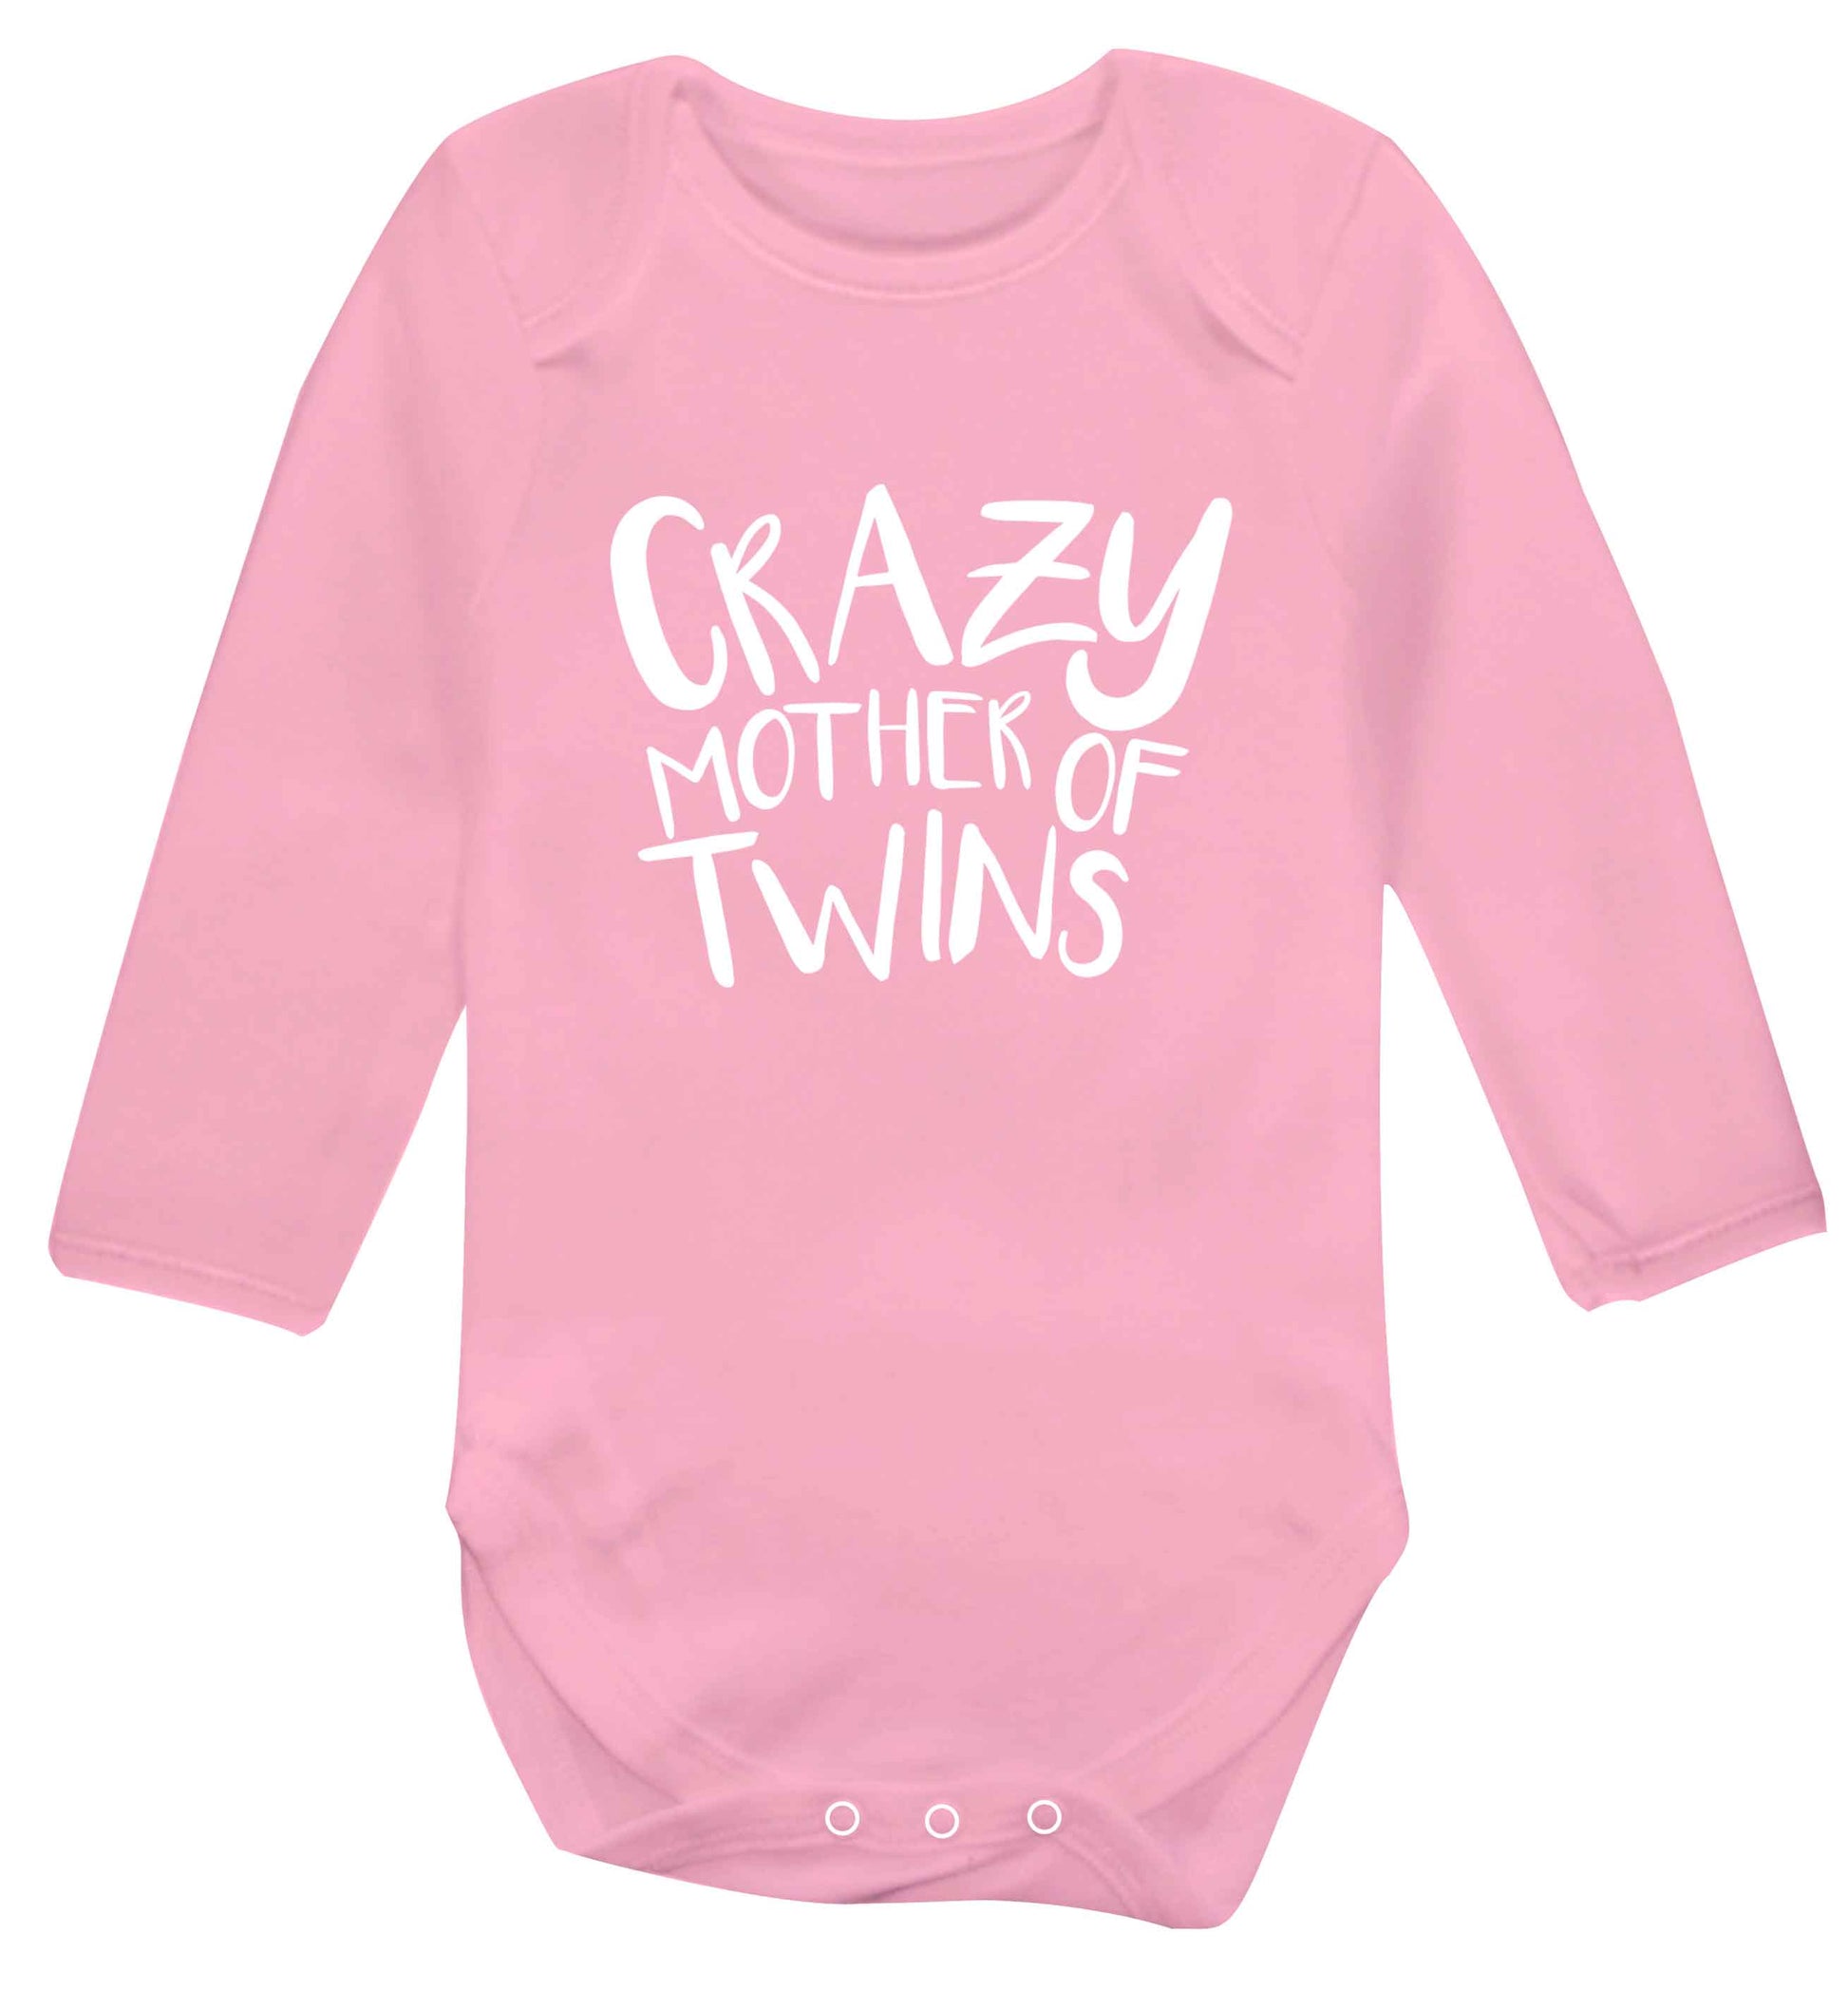 Crazy mother of twins baby vest long sleeved pale pink 6-12 months